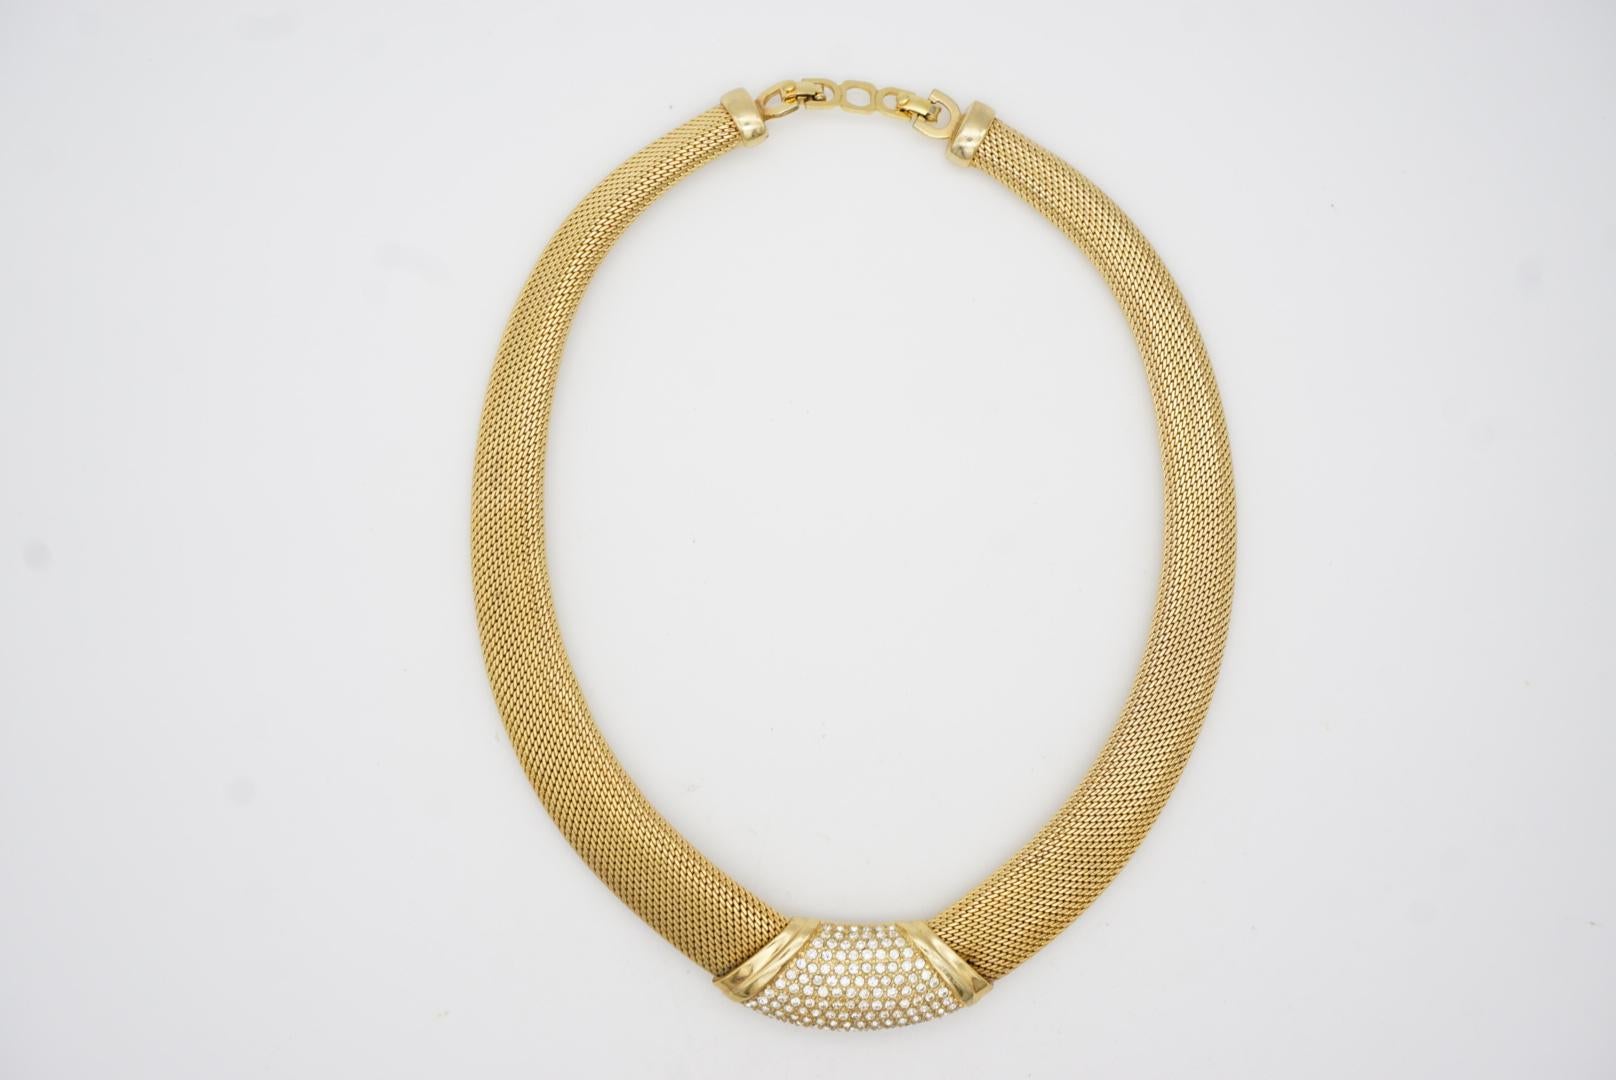 Christian Dior Vintage 1980s Crystals Pendant Chunky Snake Mesh Choker Necklace For Sale 4